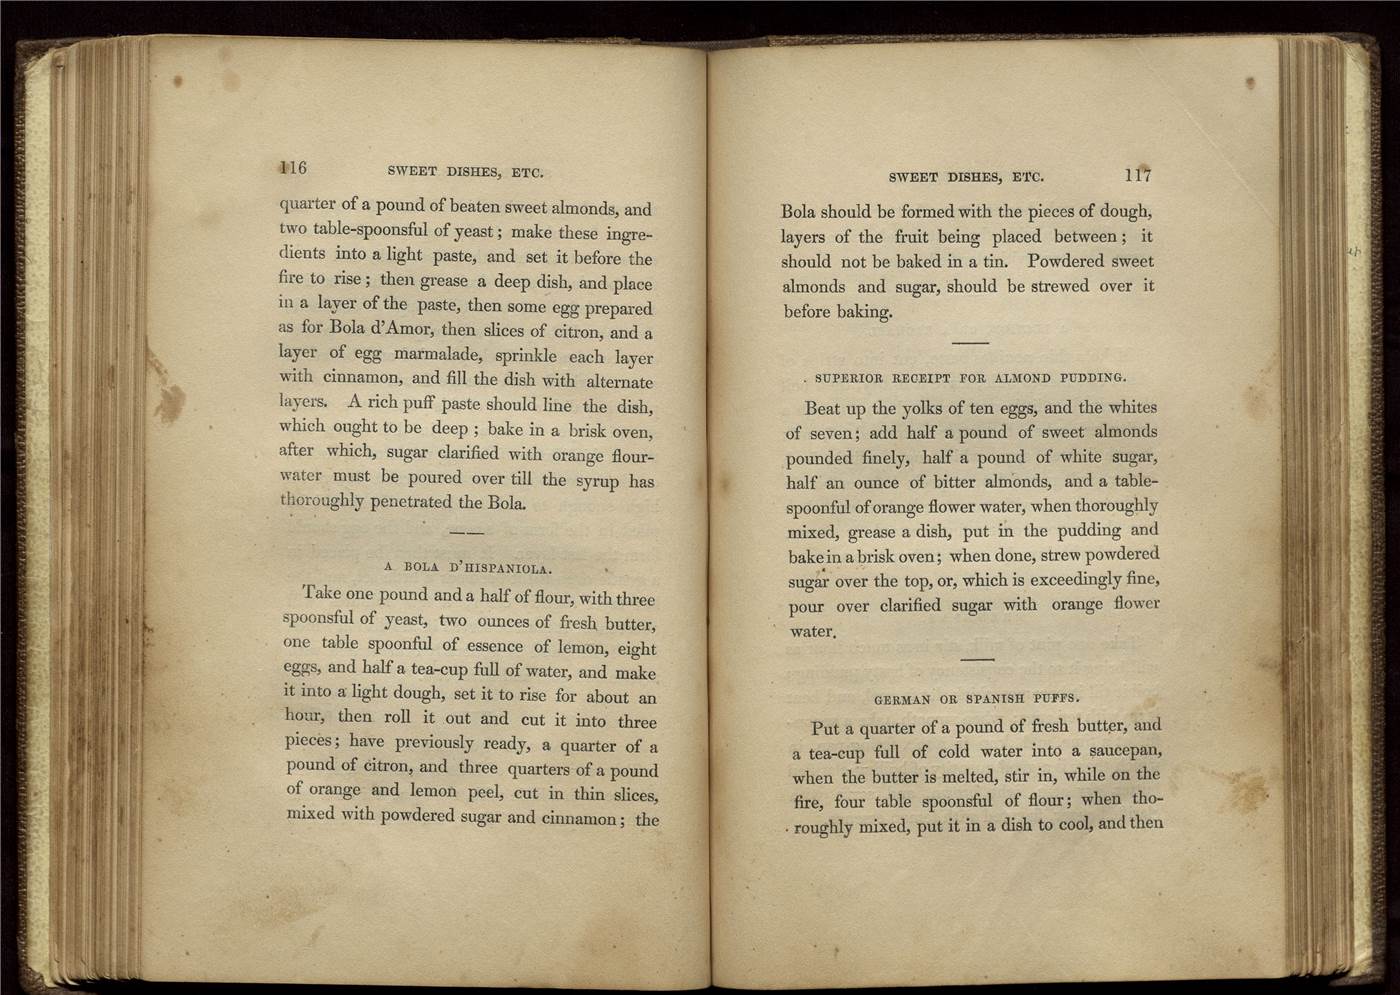 pagespread with chapter heading "Sweet Dishes, etc" showing recipe for Bola D'Hispaniola